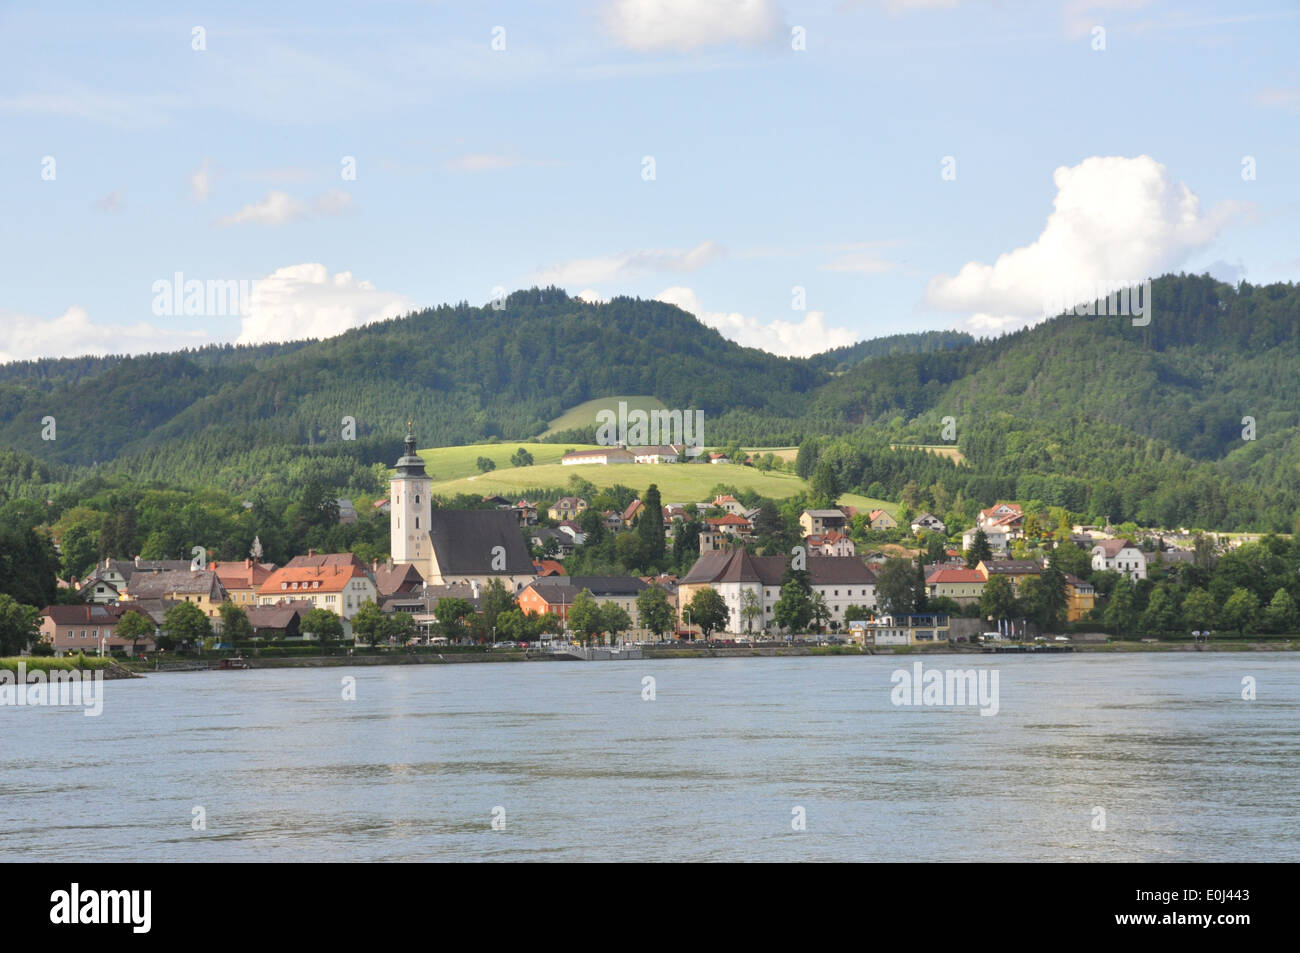 View of the scenic town of Grein from across the Danube River, Austria. Stock Photo